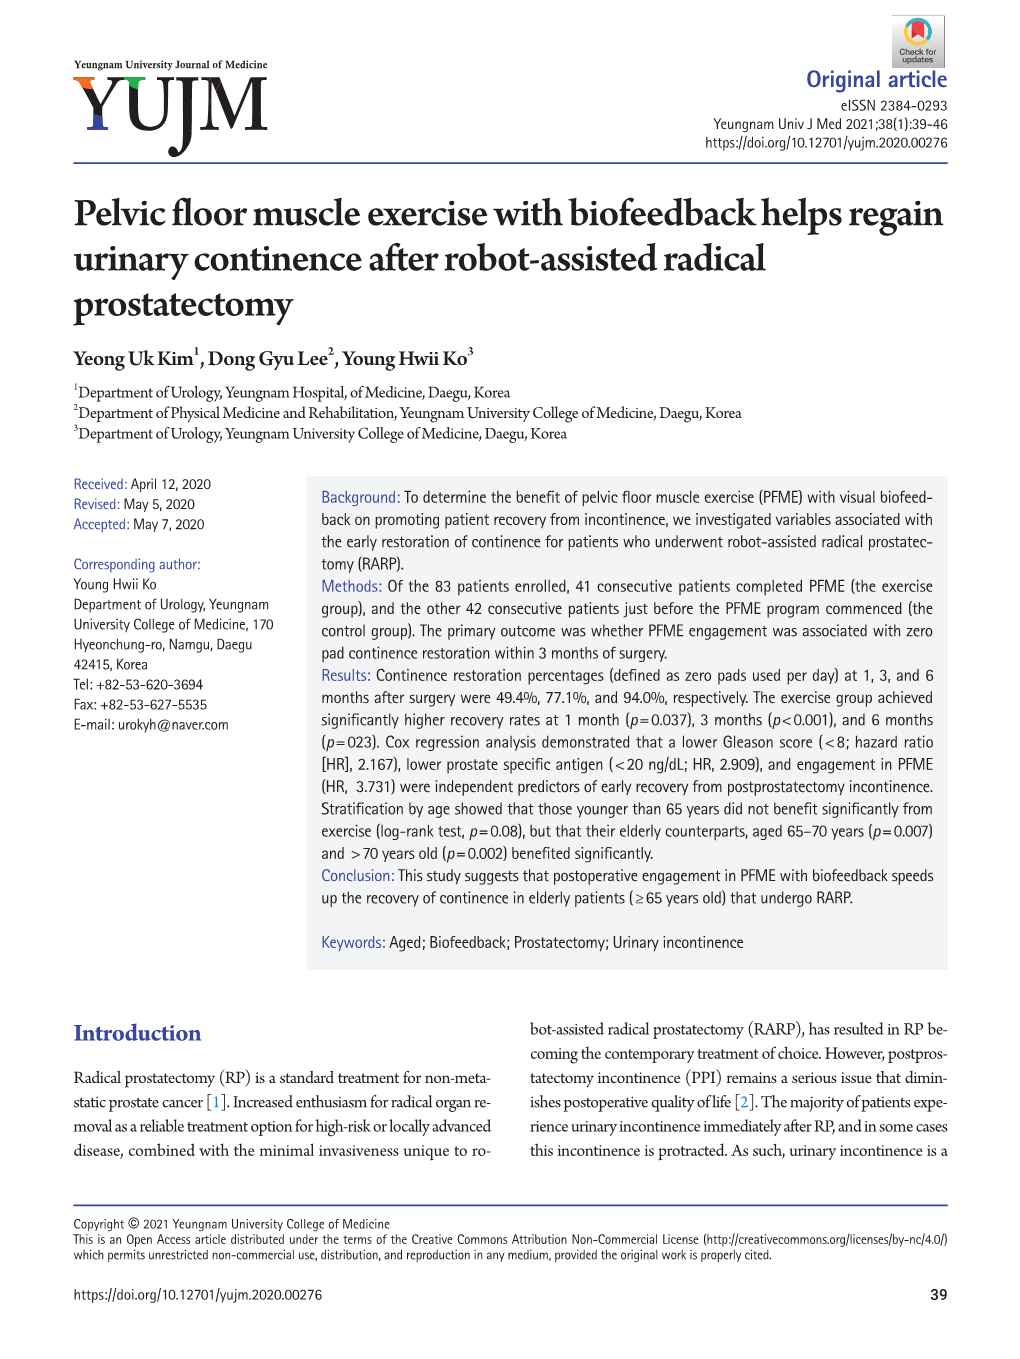 Pelvic Floor Muscle Exercise with Biofeedback Helps Regain Urinary